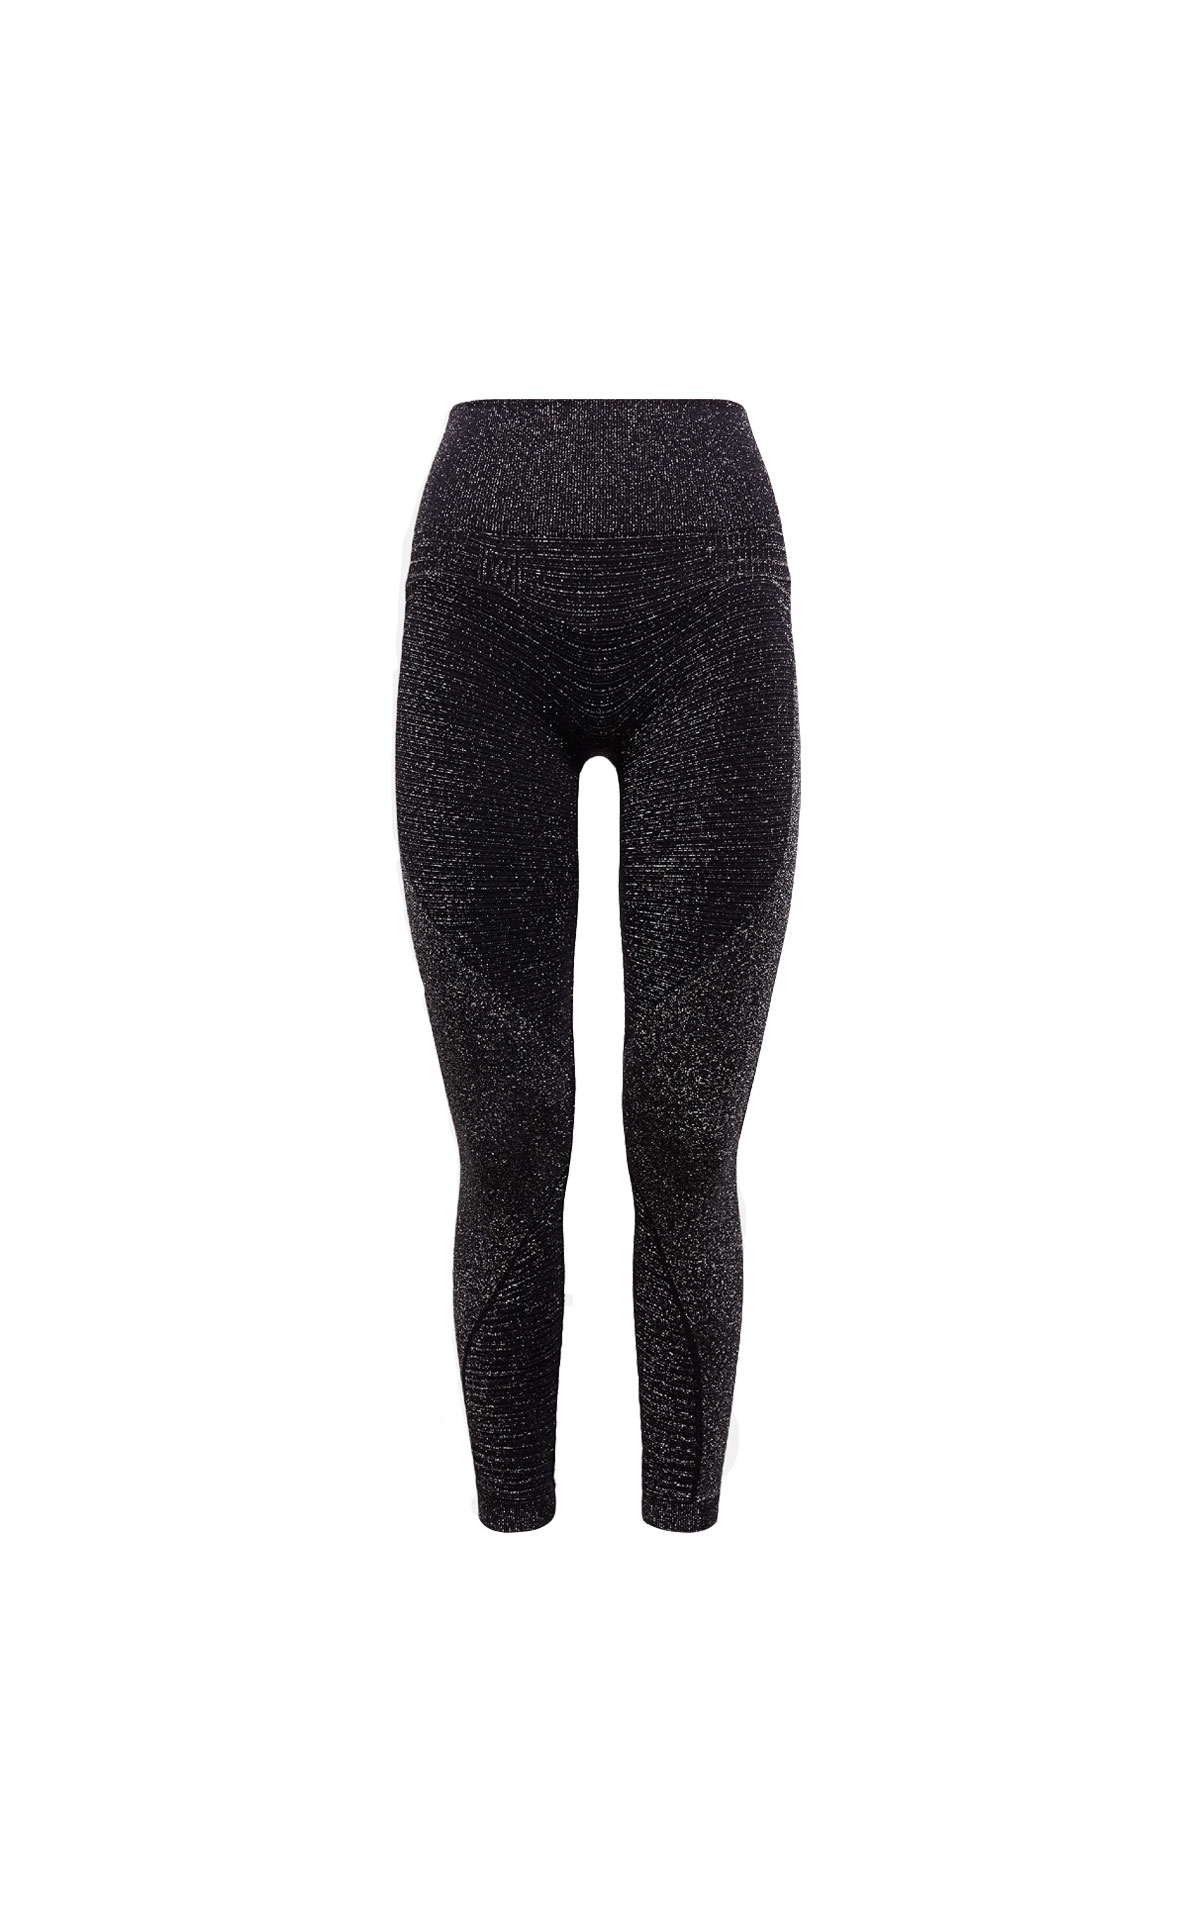 Wolford Luna leggings from Bicester Village